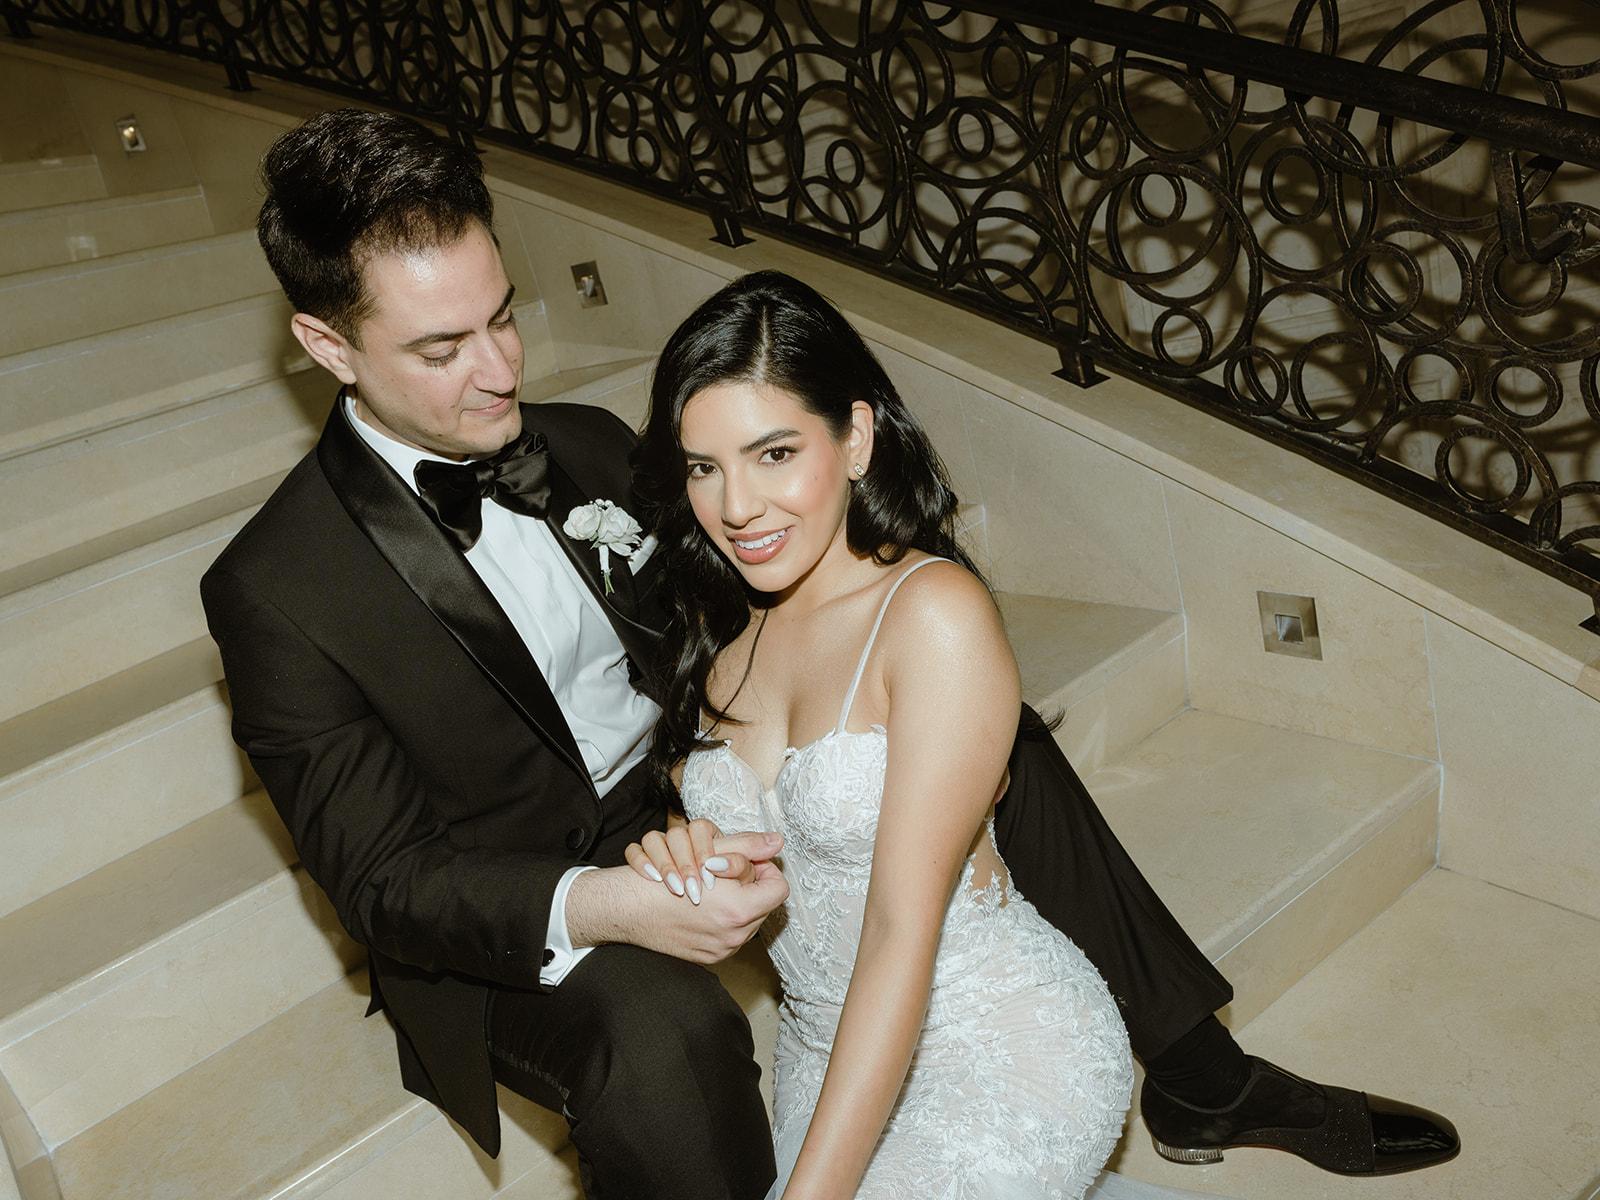 Editorial and modern wedding photography at the Four Seasons Resort in Orlando, Florida at this luxury wedding